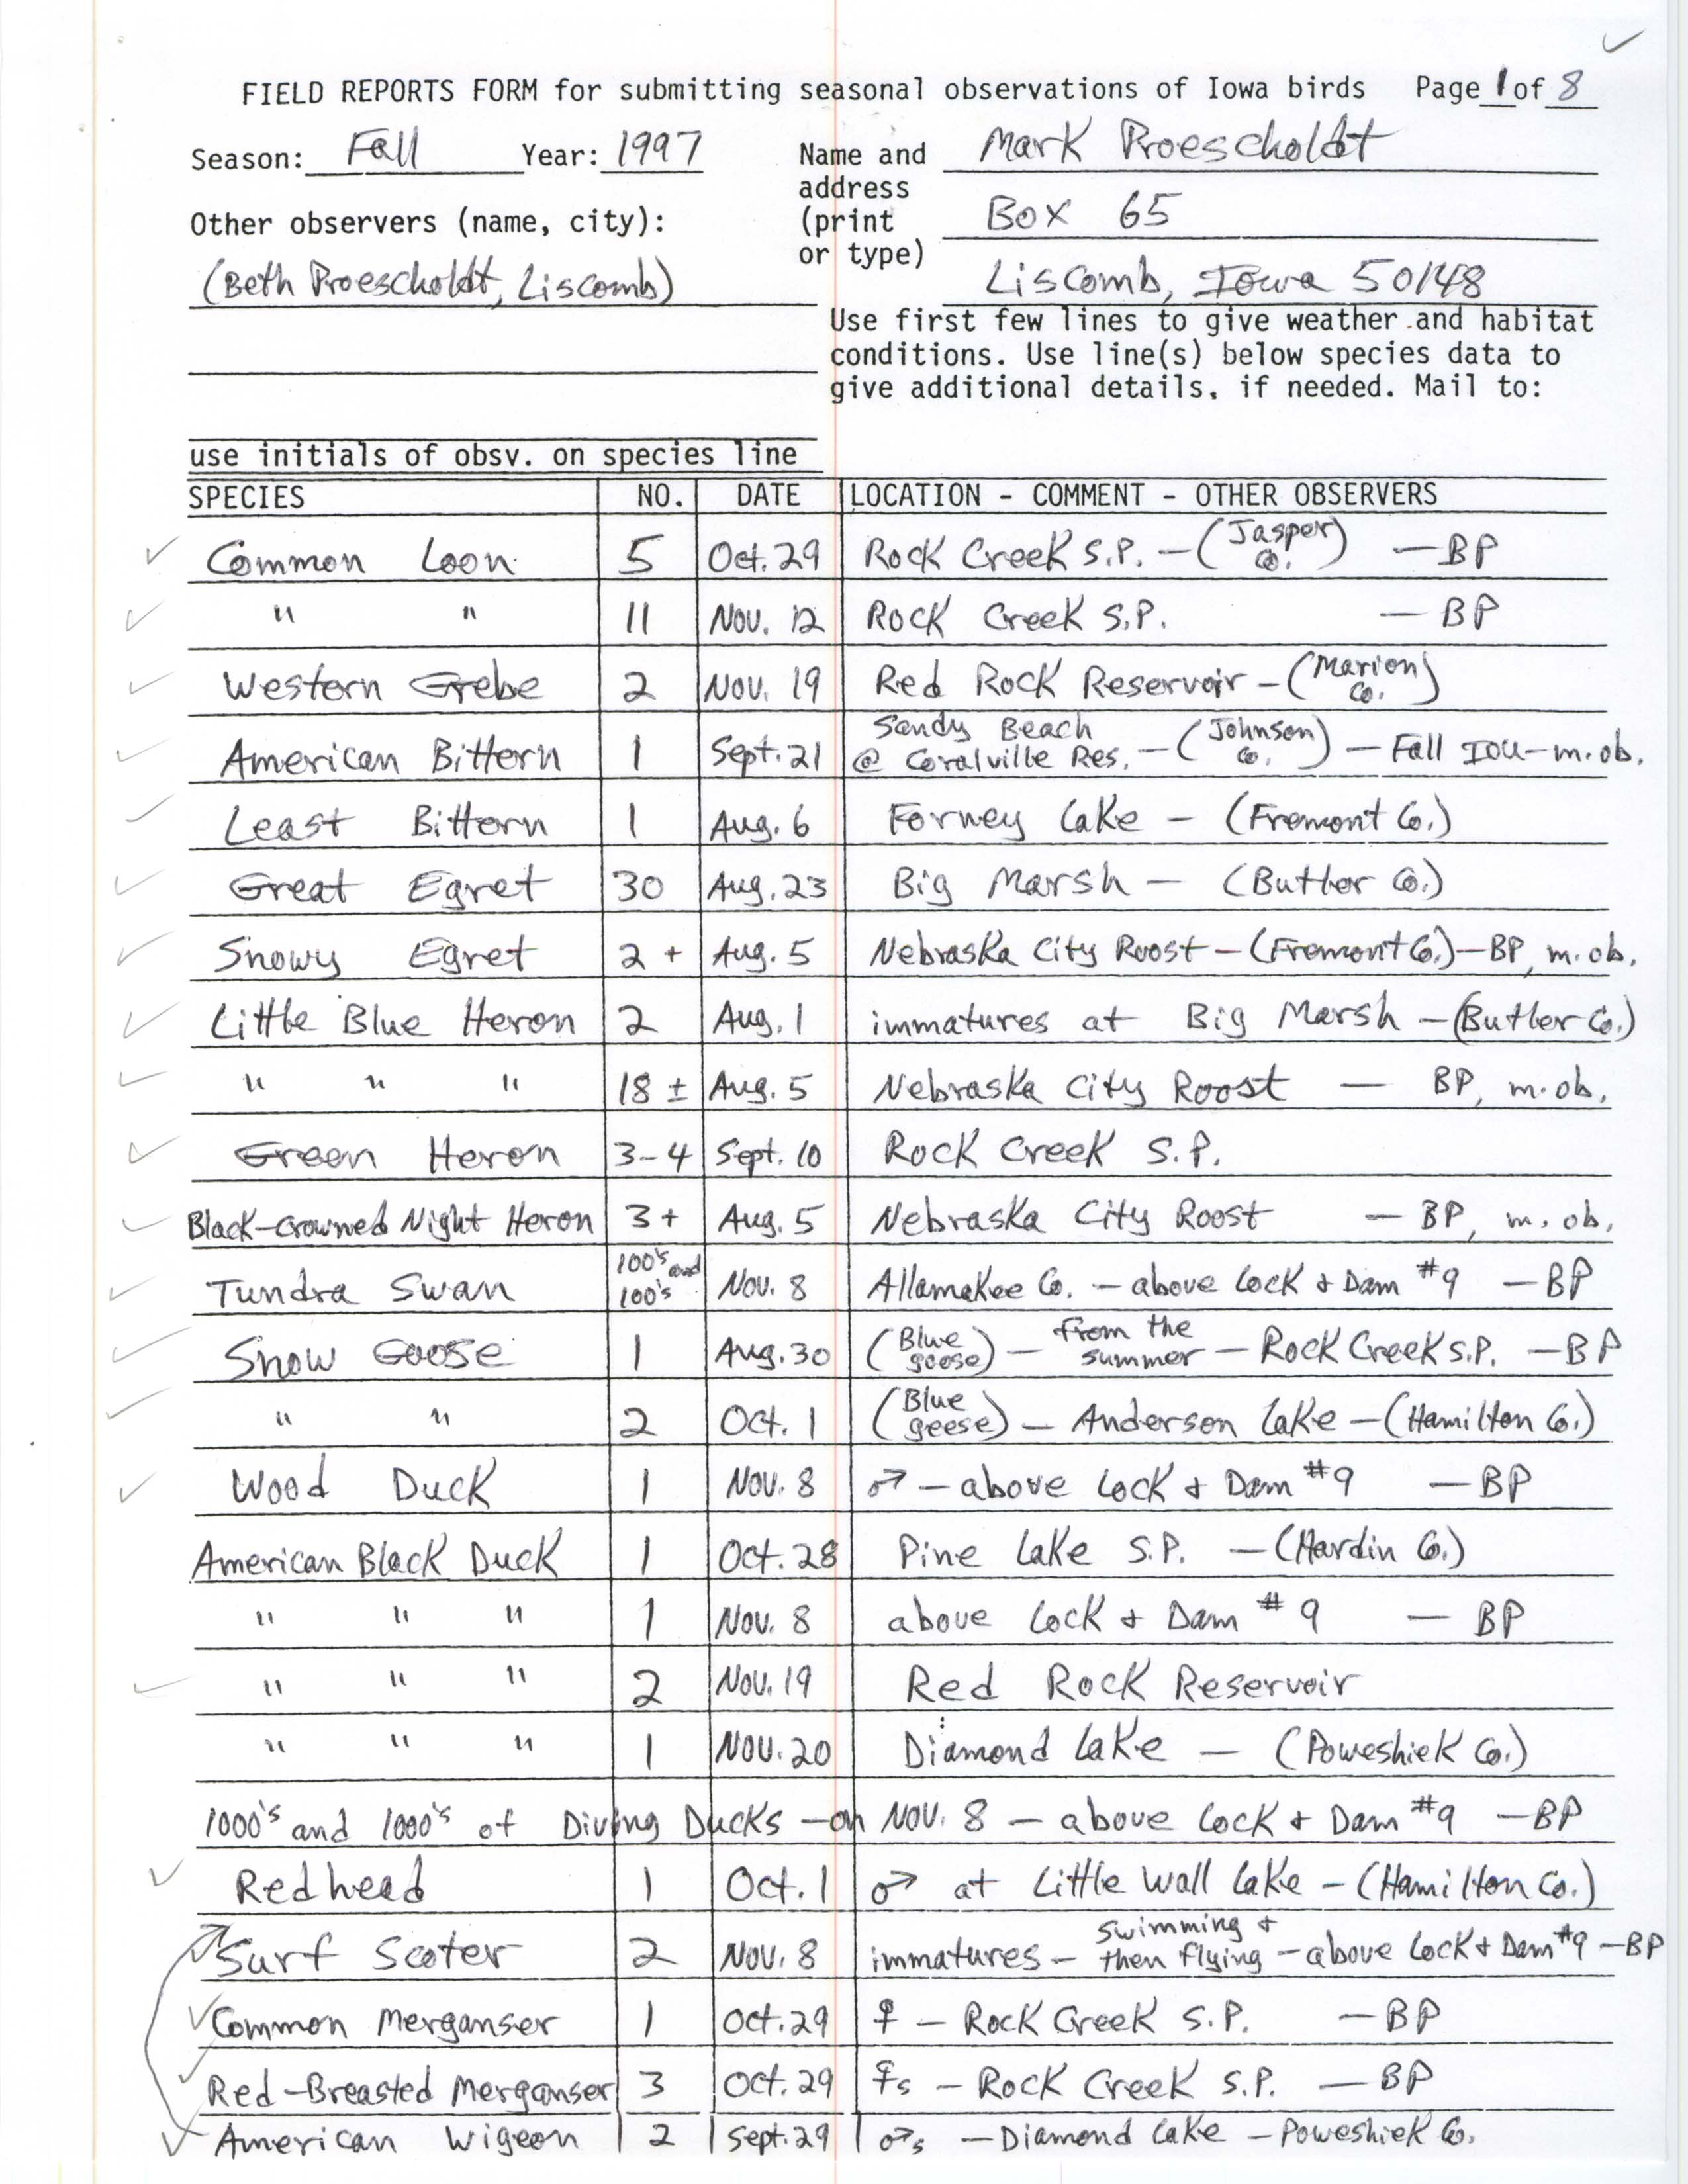 Field reports form for submitting seasonal observations of Iowa birds, Mark Proescholdt, fall 1997